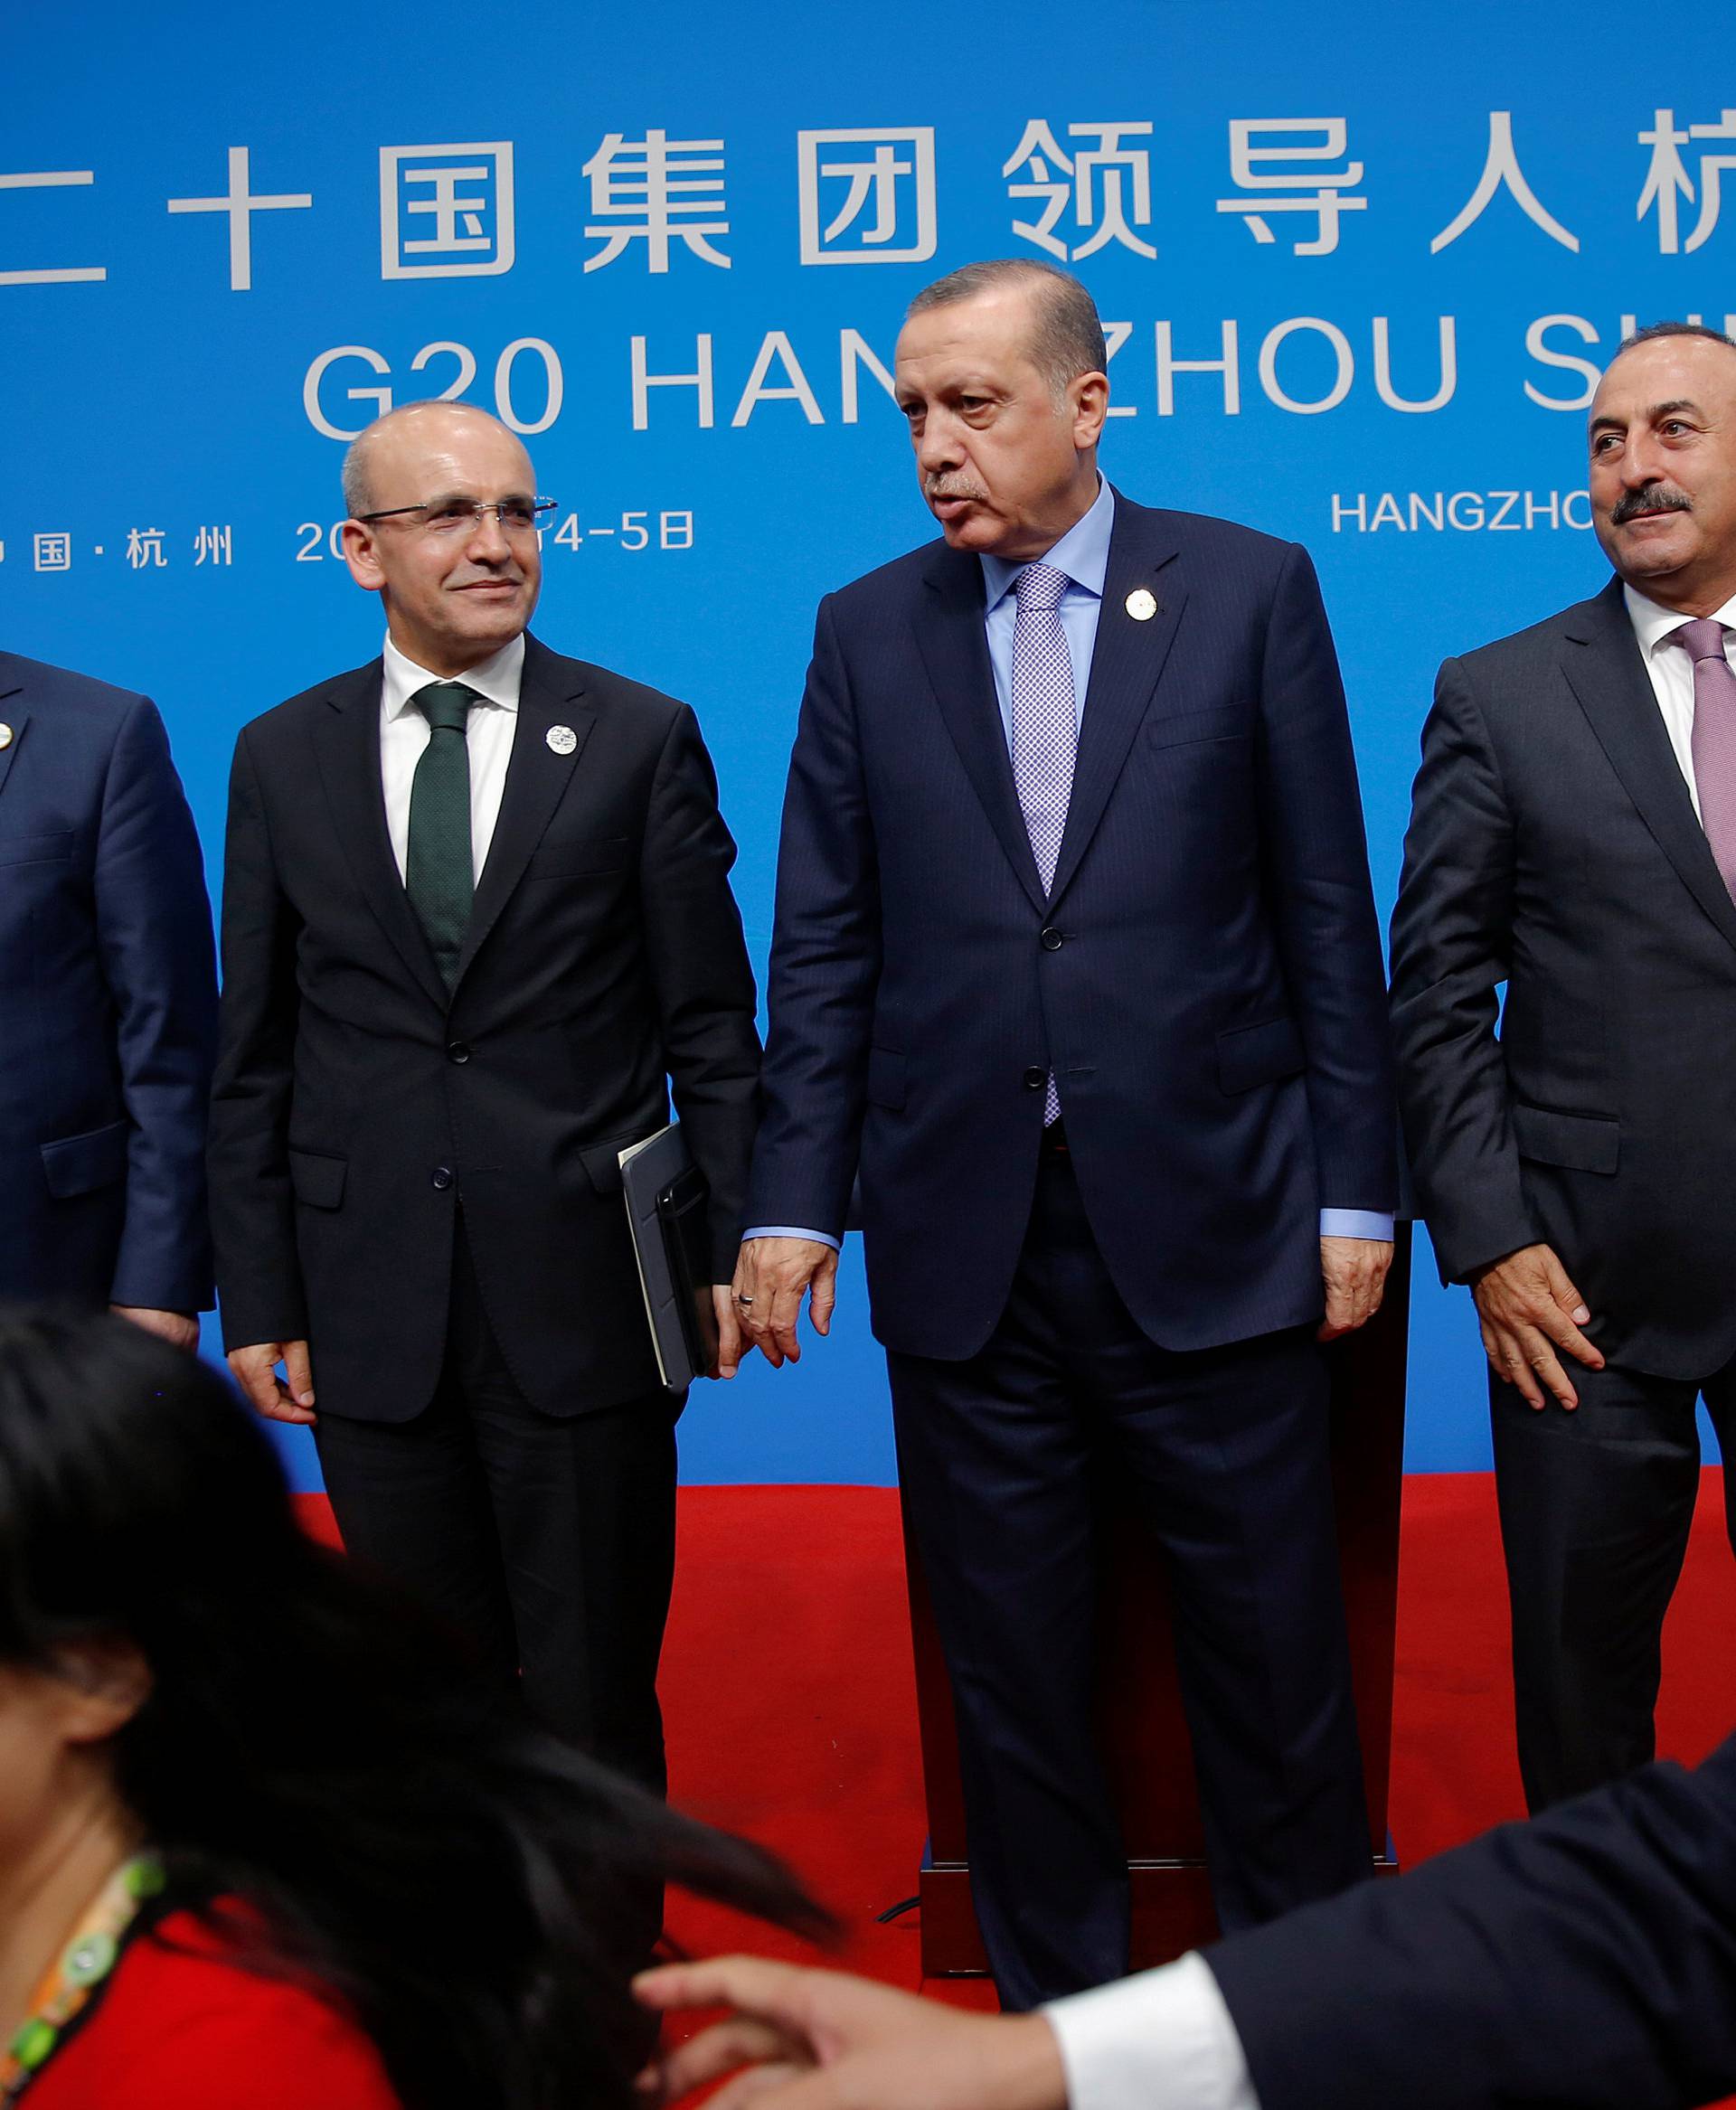 A security agent reacts as a woman tries to have a pictures taken in front of Turkey's President Tayyip Erdogan and his delegation after the closing of G20 Summit in Hangzhou